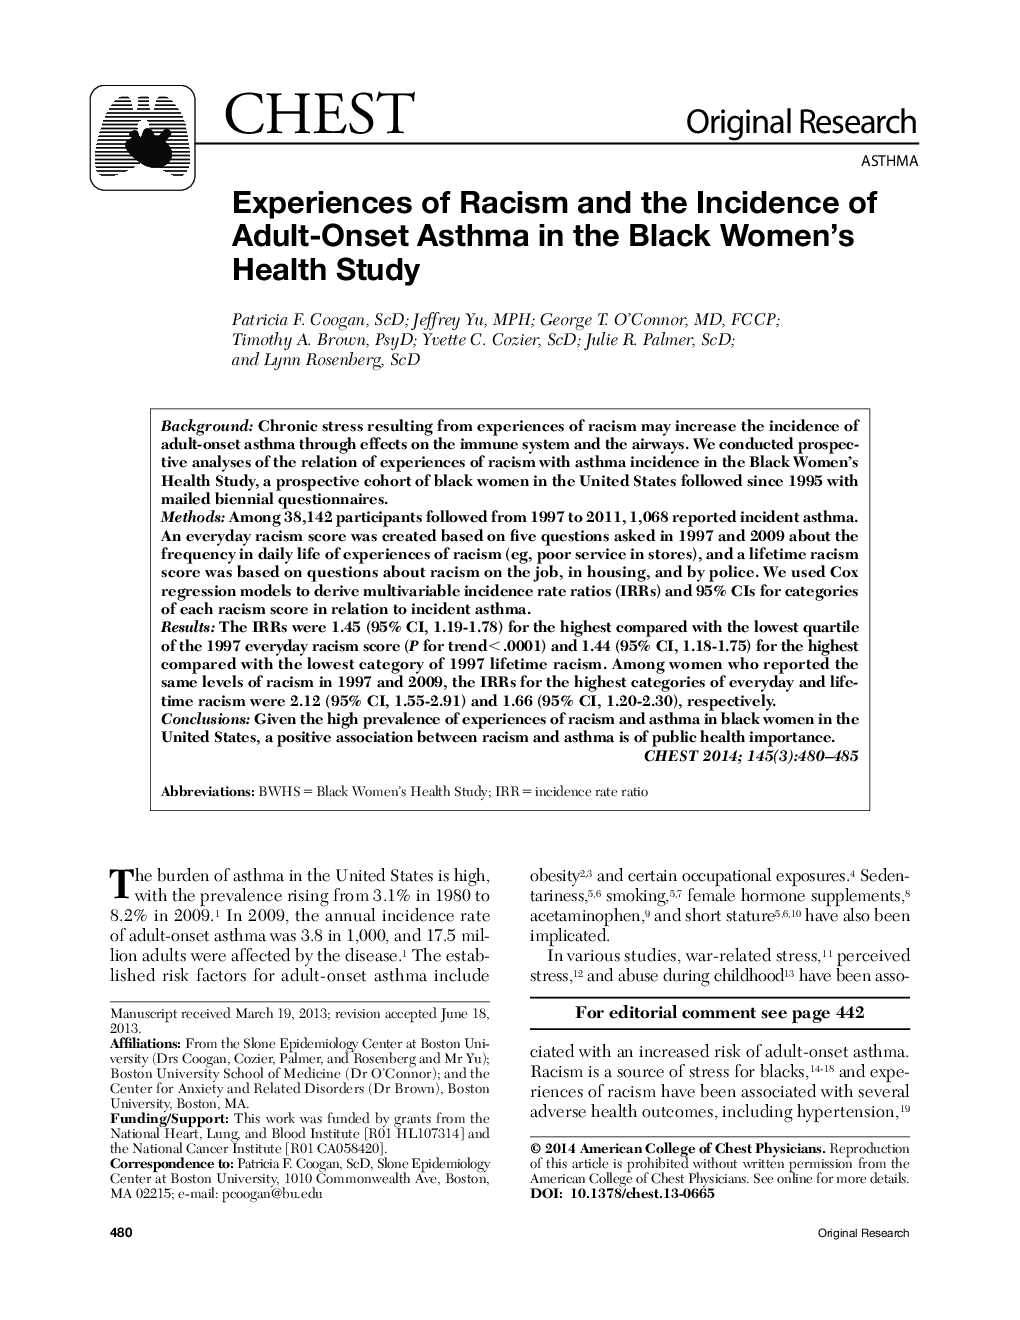 Experiences of Racism and the Incidence of Adult-Onset Asthma in the Black Women's Health Study 